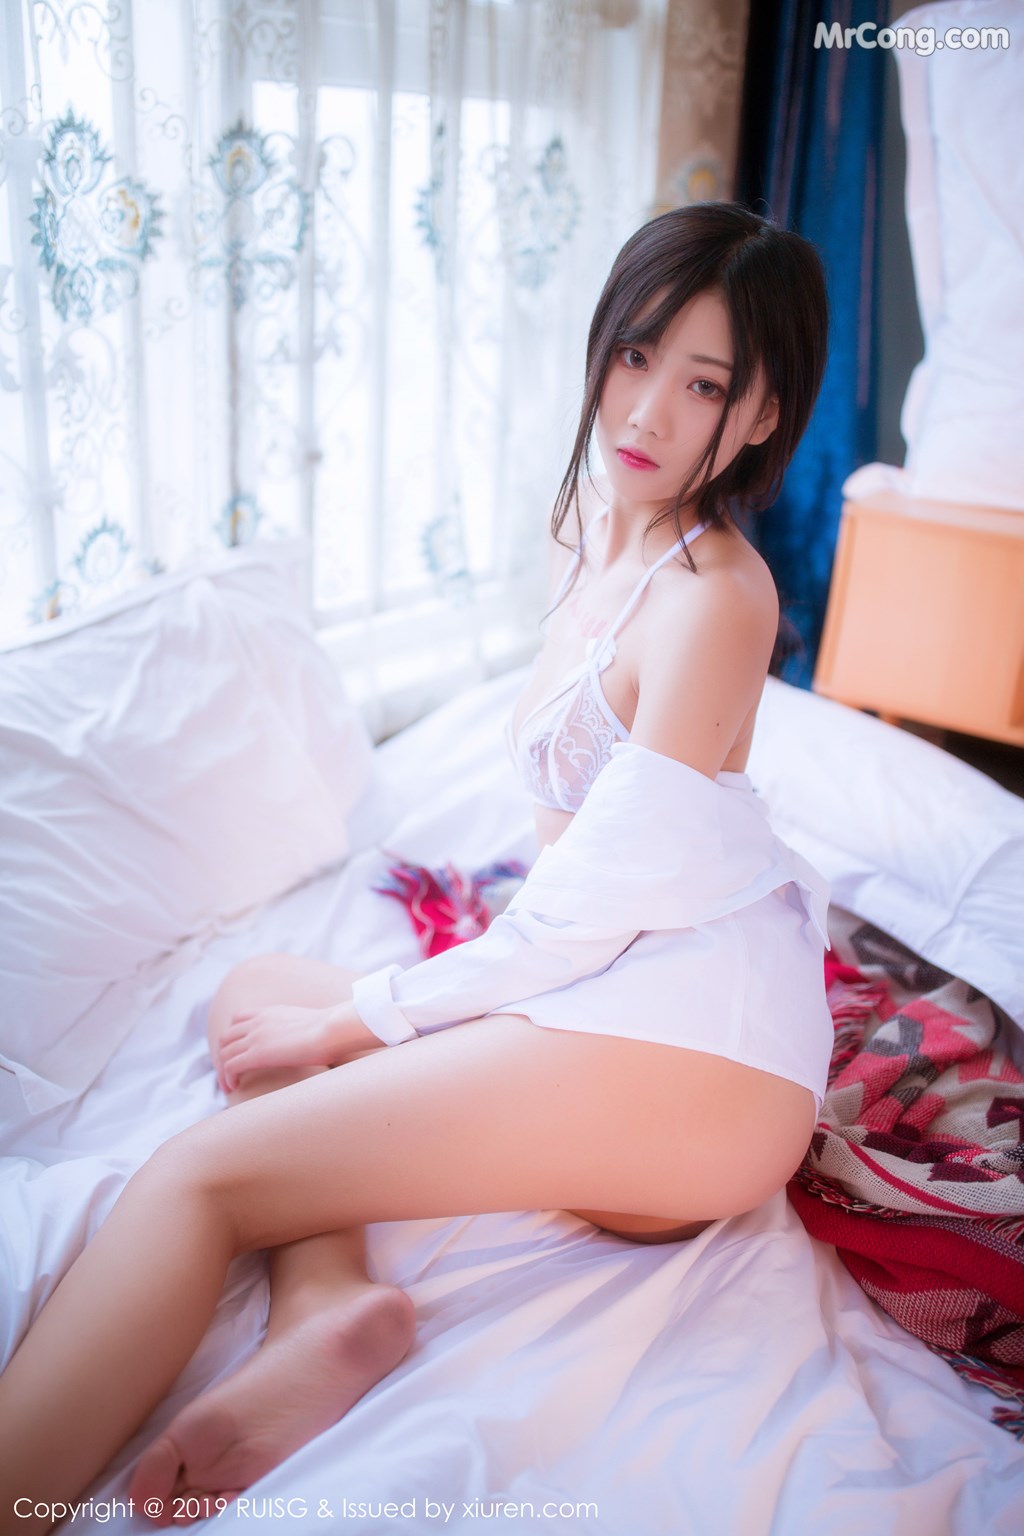 RuiSG Vol.087: 人间 不 值得 lily (43 pictures) photo 1-13